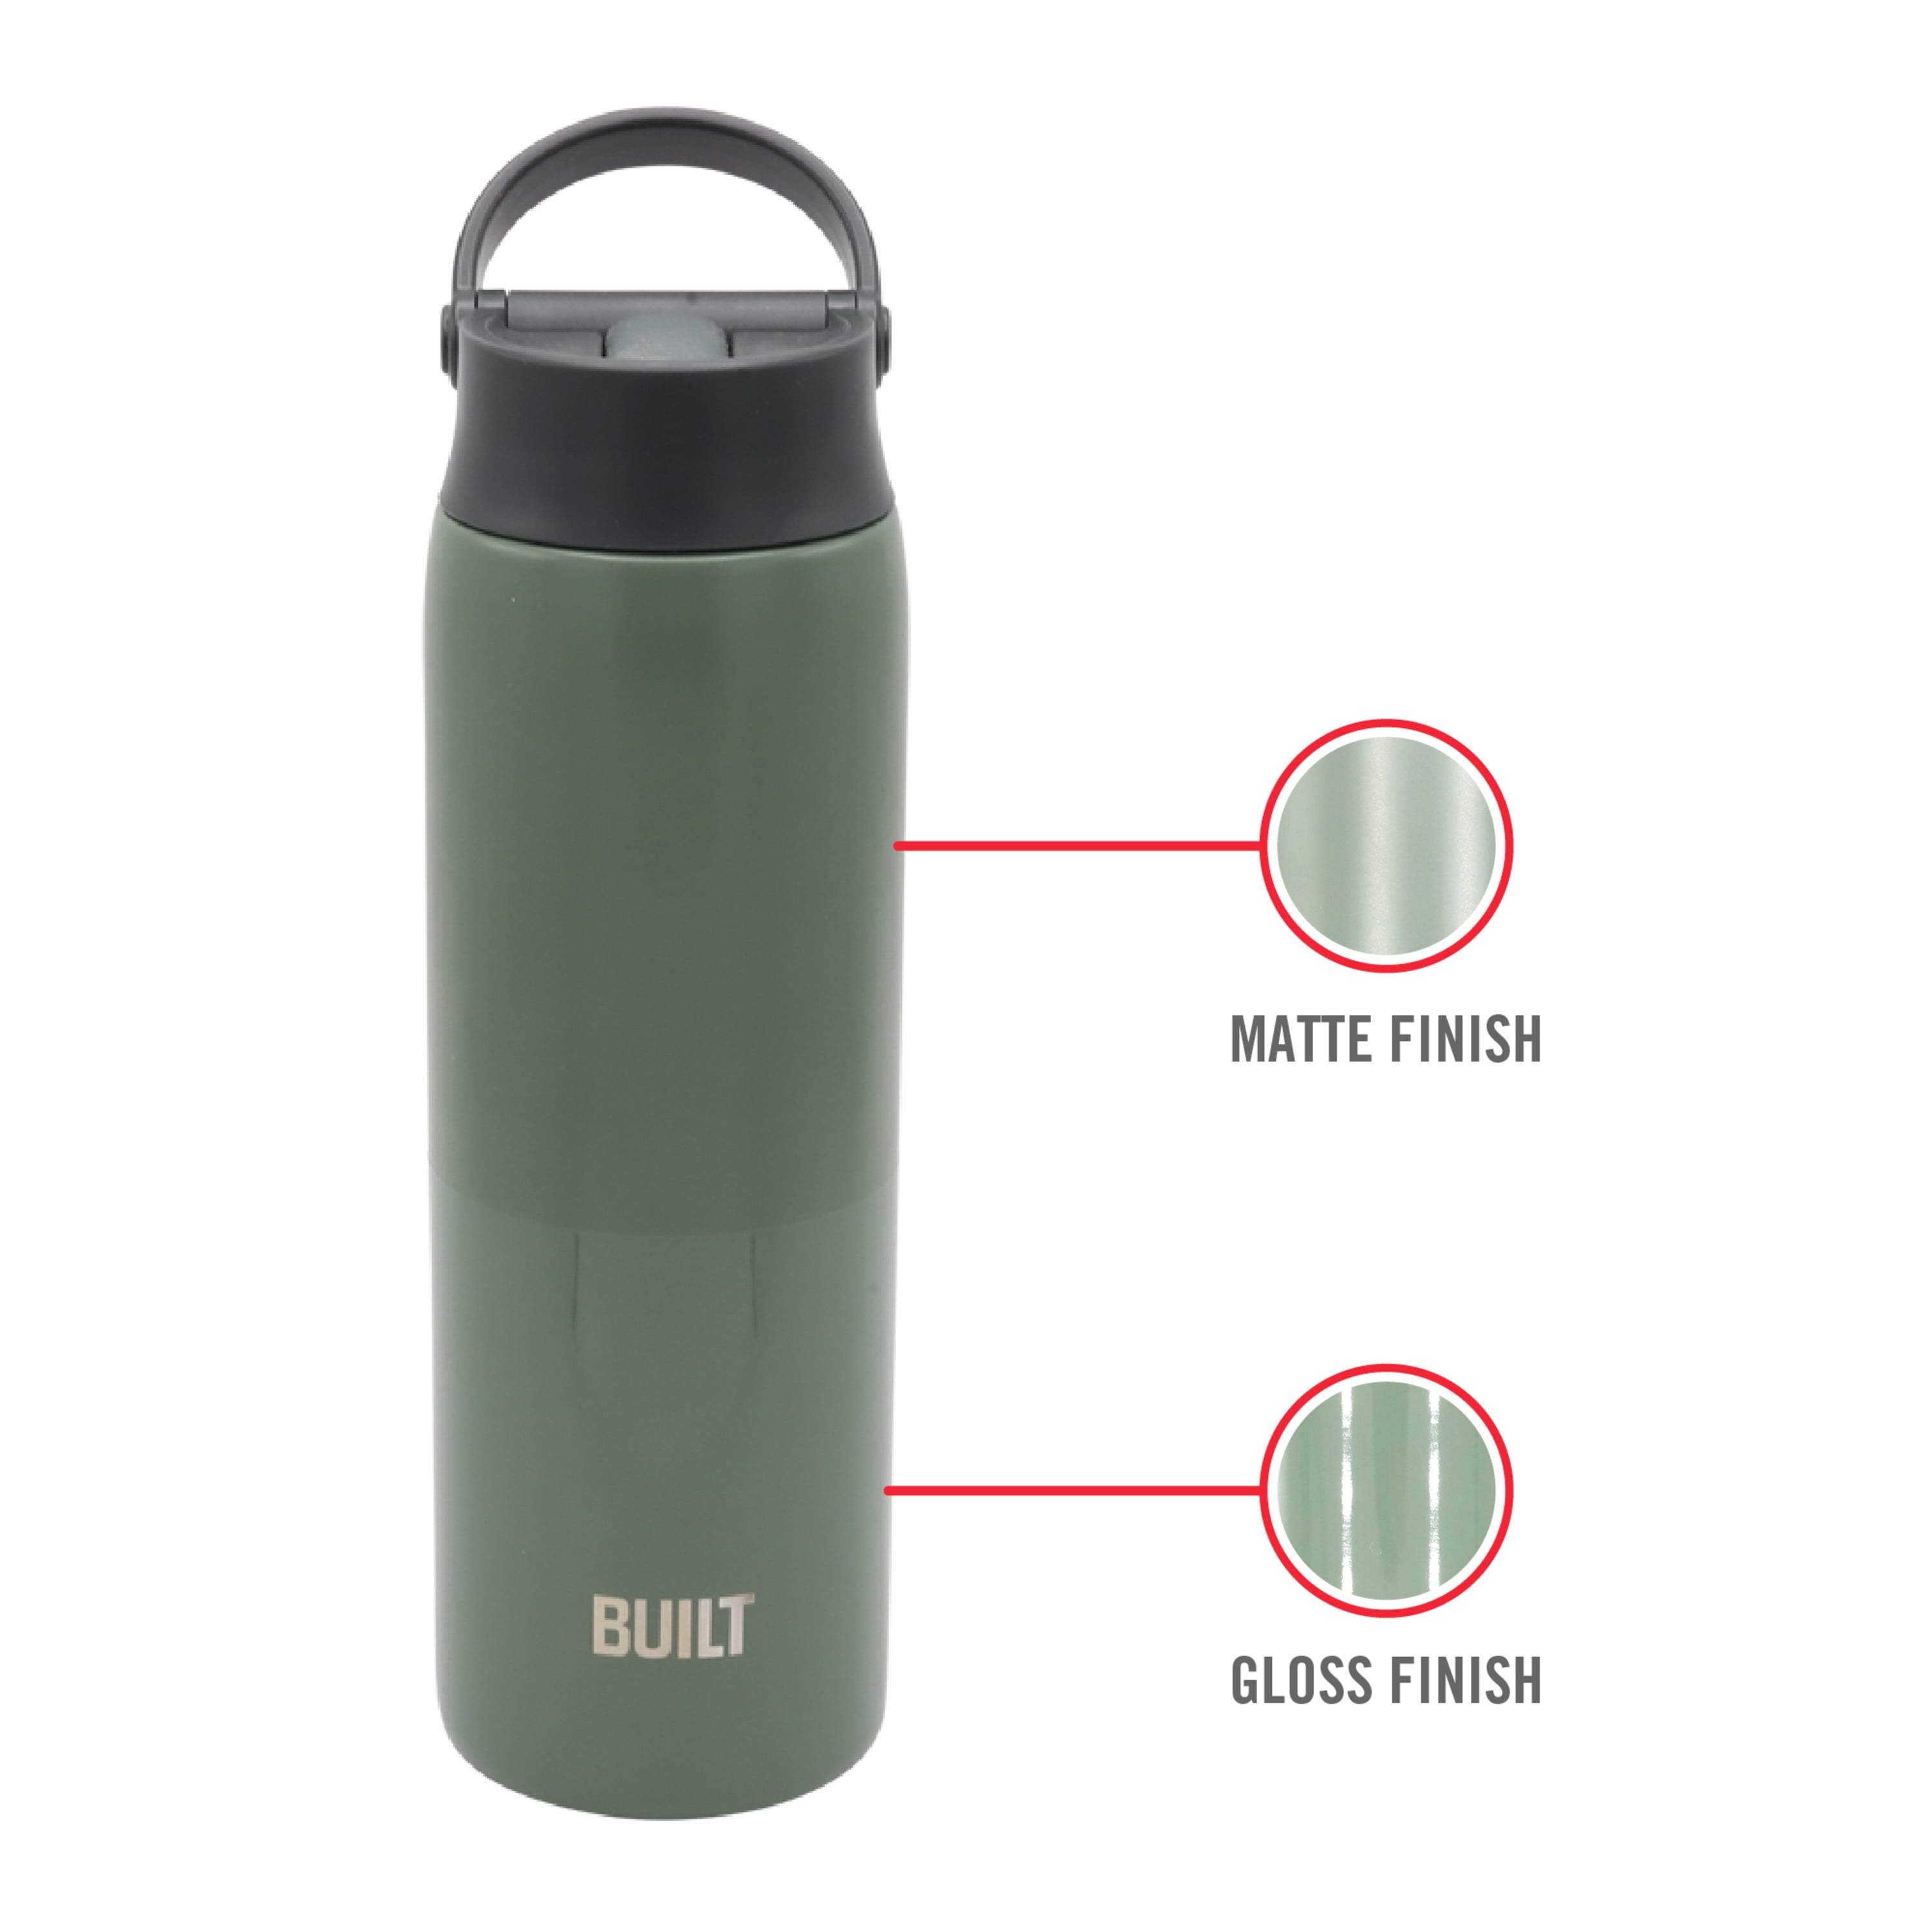 Melrose - 20 oz (600 ml) Double Wall Stainless Steel Bottle Coral